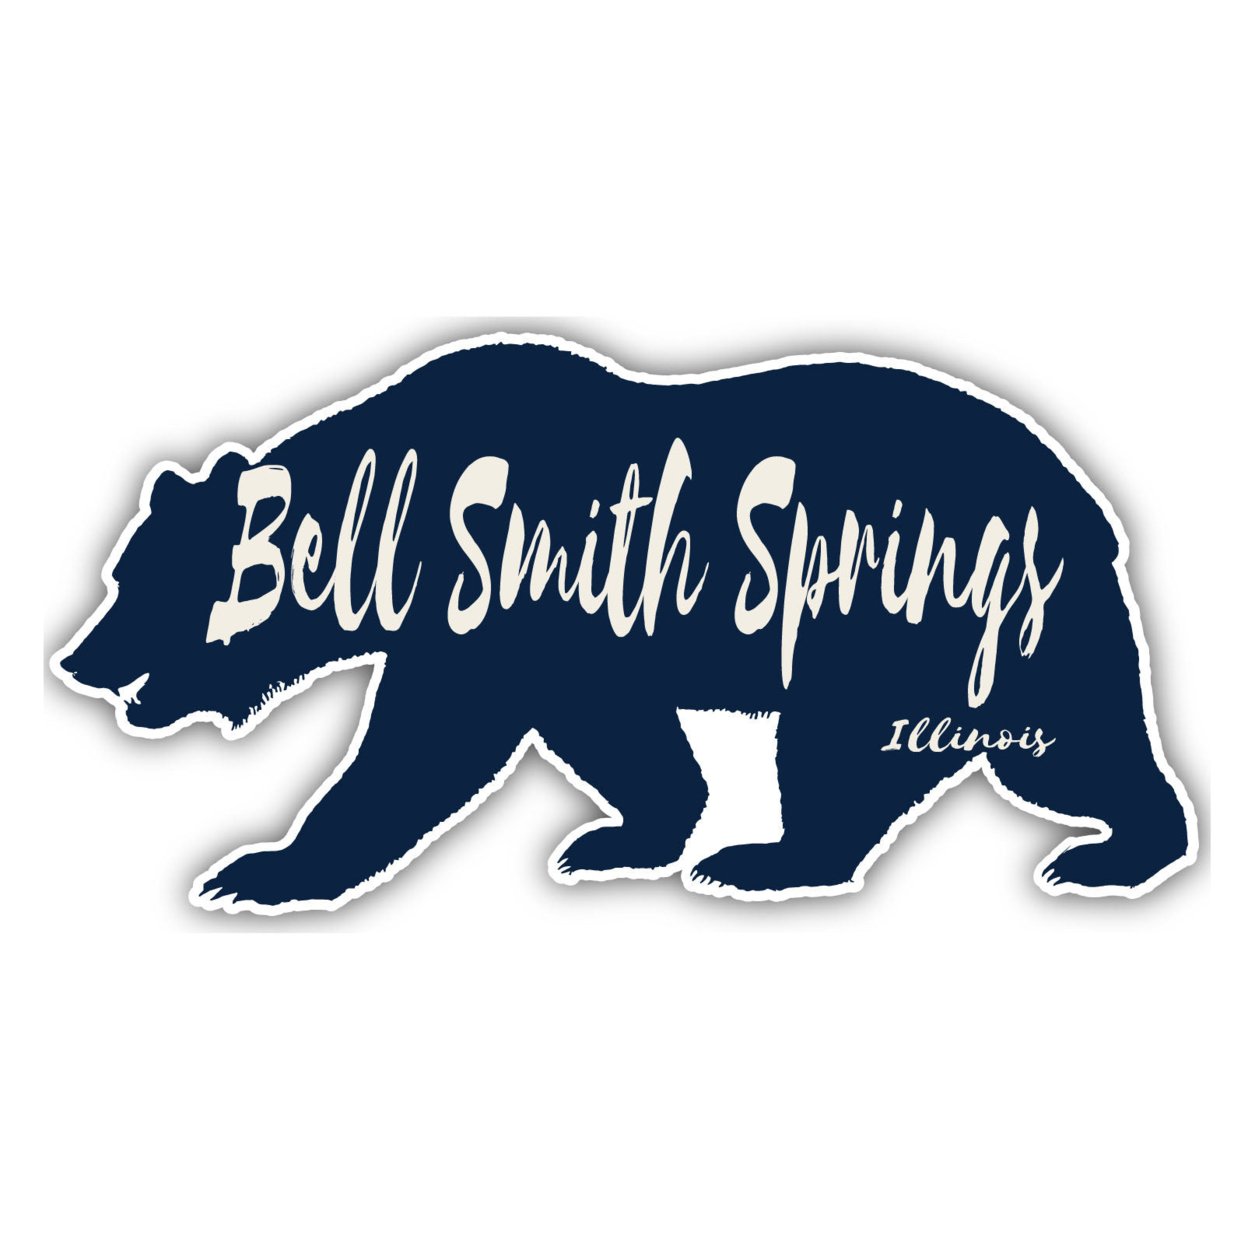 Bell Smith Springs Illinois Souvenir Decorative Stickers (Choose Theme And Size) - Single Unit, 8-Inch, Camp Life